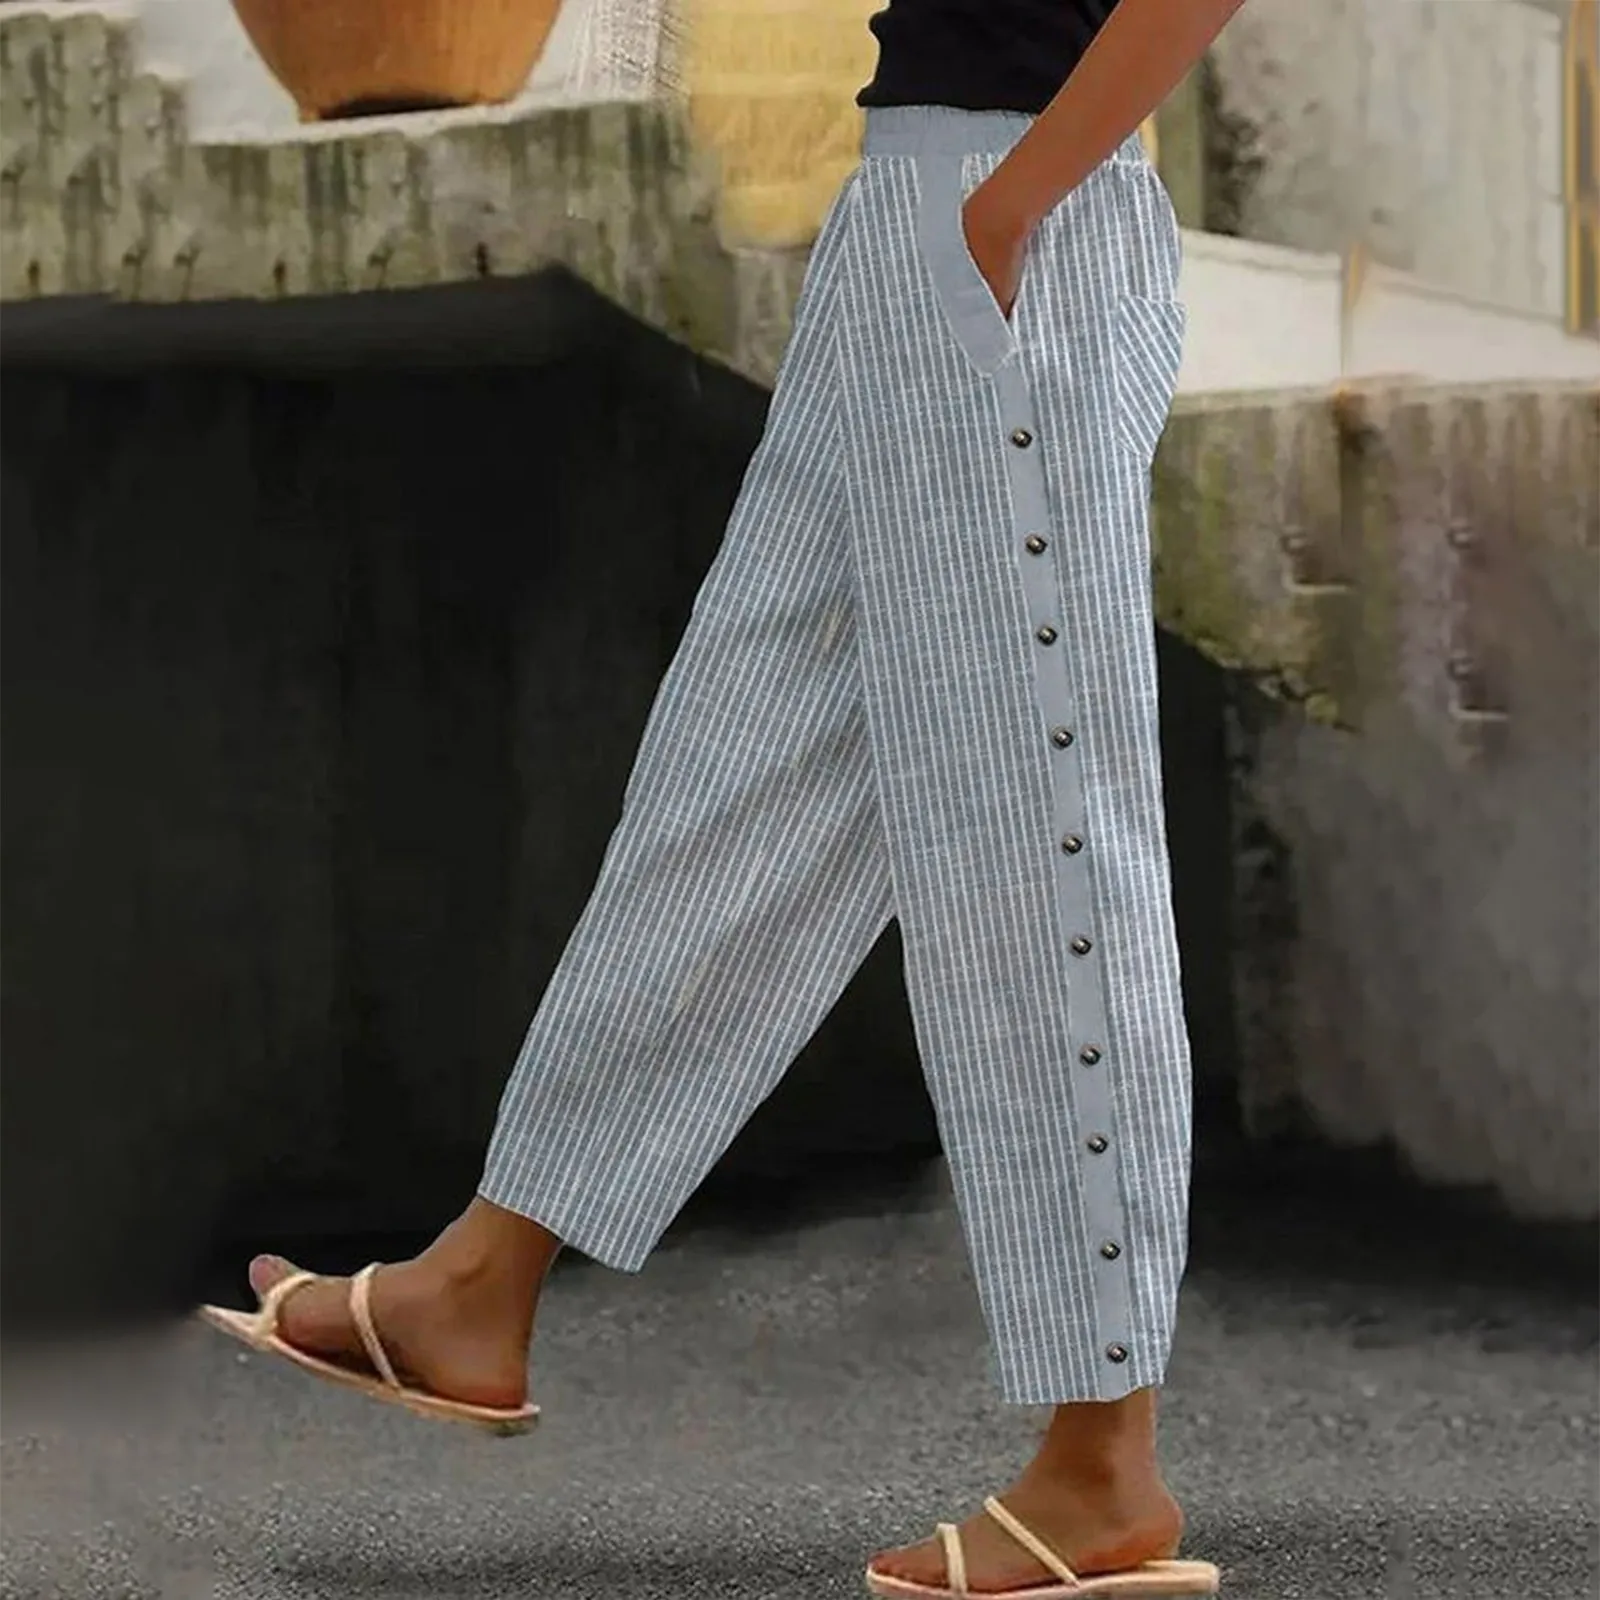 

Striped Print Casual Loose Fit Pants with Side Buttons Pockets for Women Comfortable Pants Mid-rise Elastic Waistband for Summer